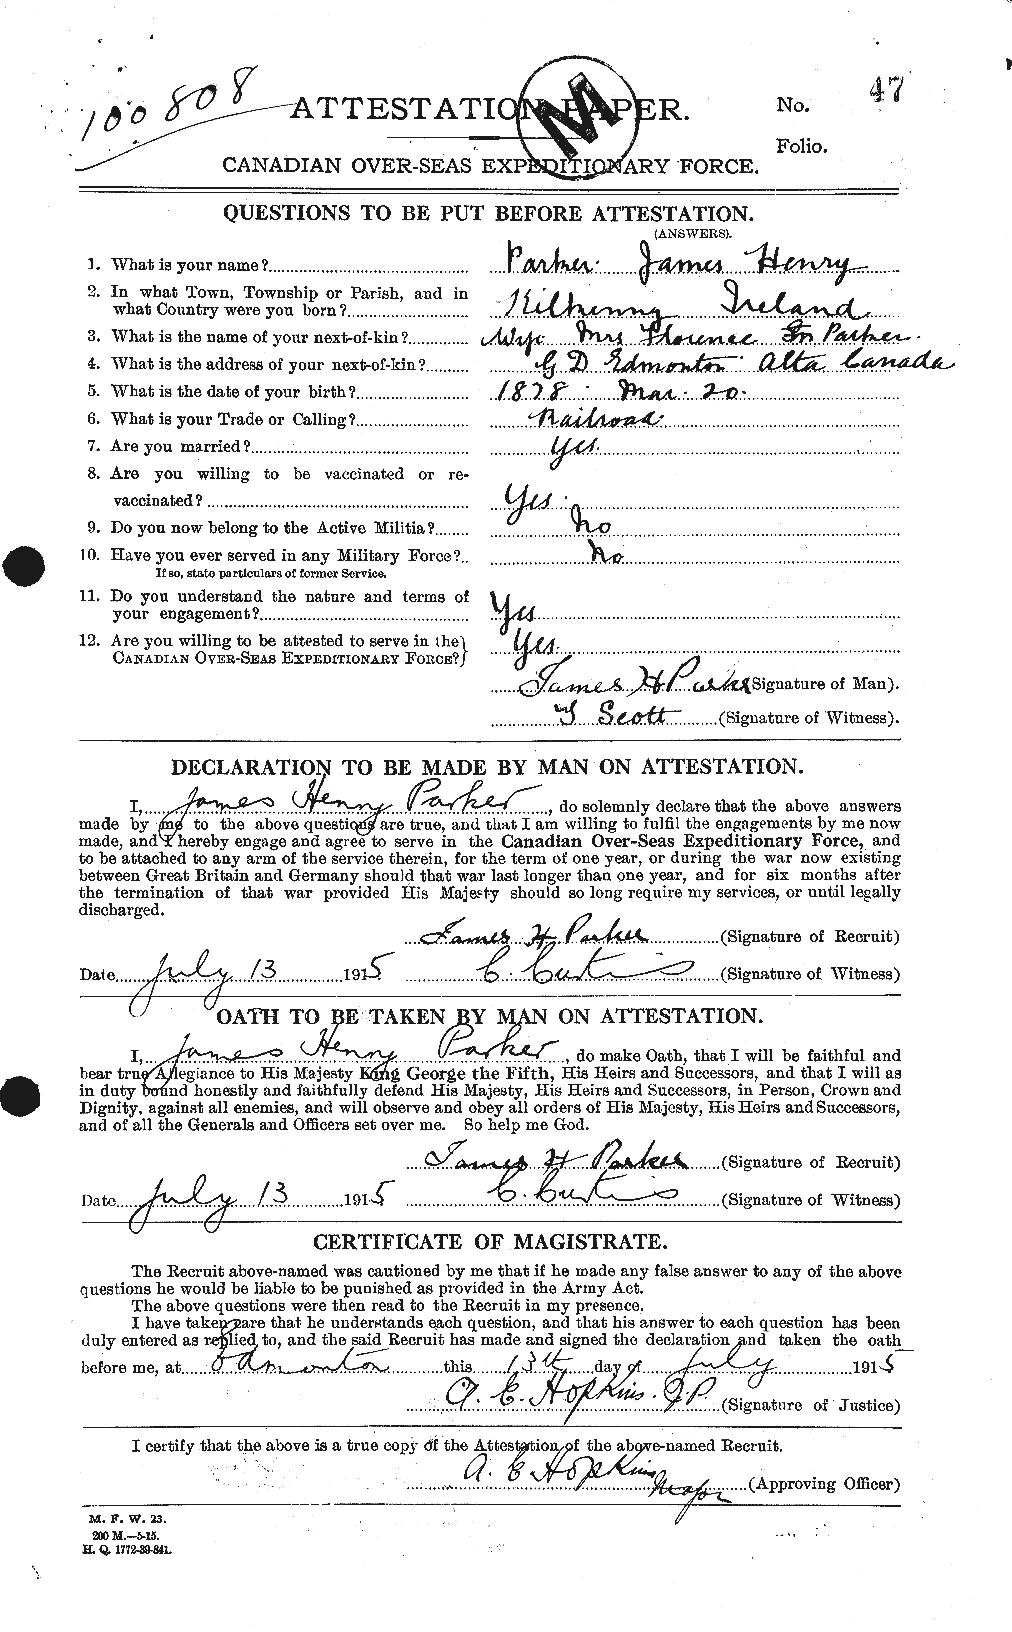 Personnel Records of the First World War - CEF 565431a